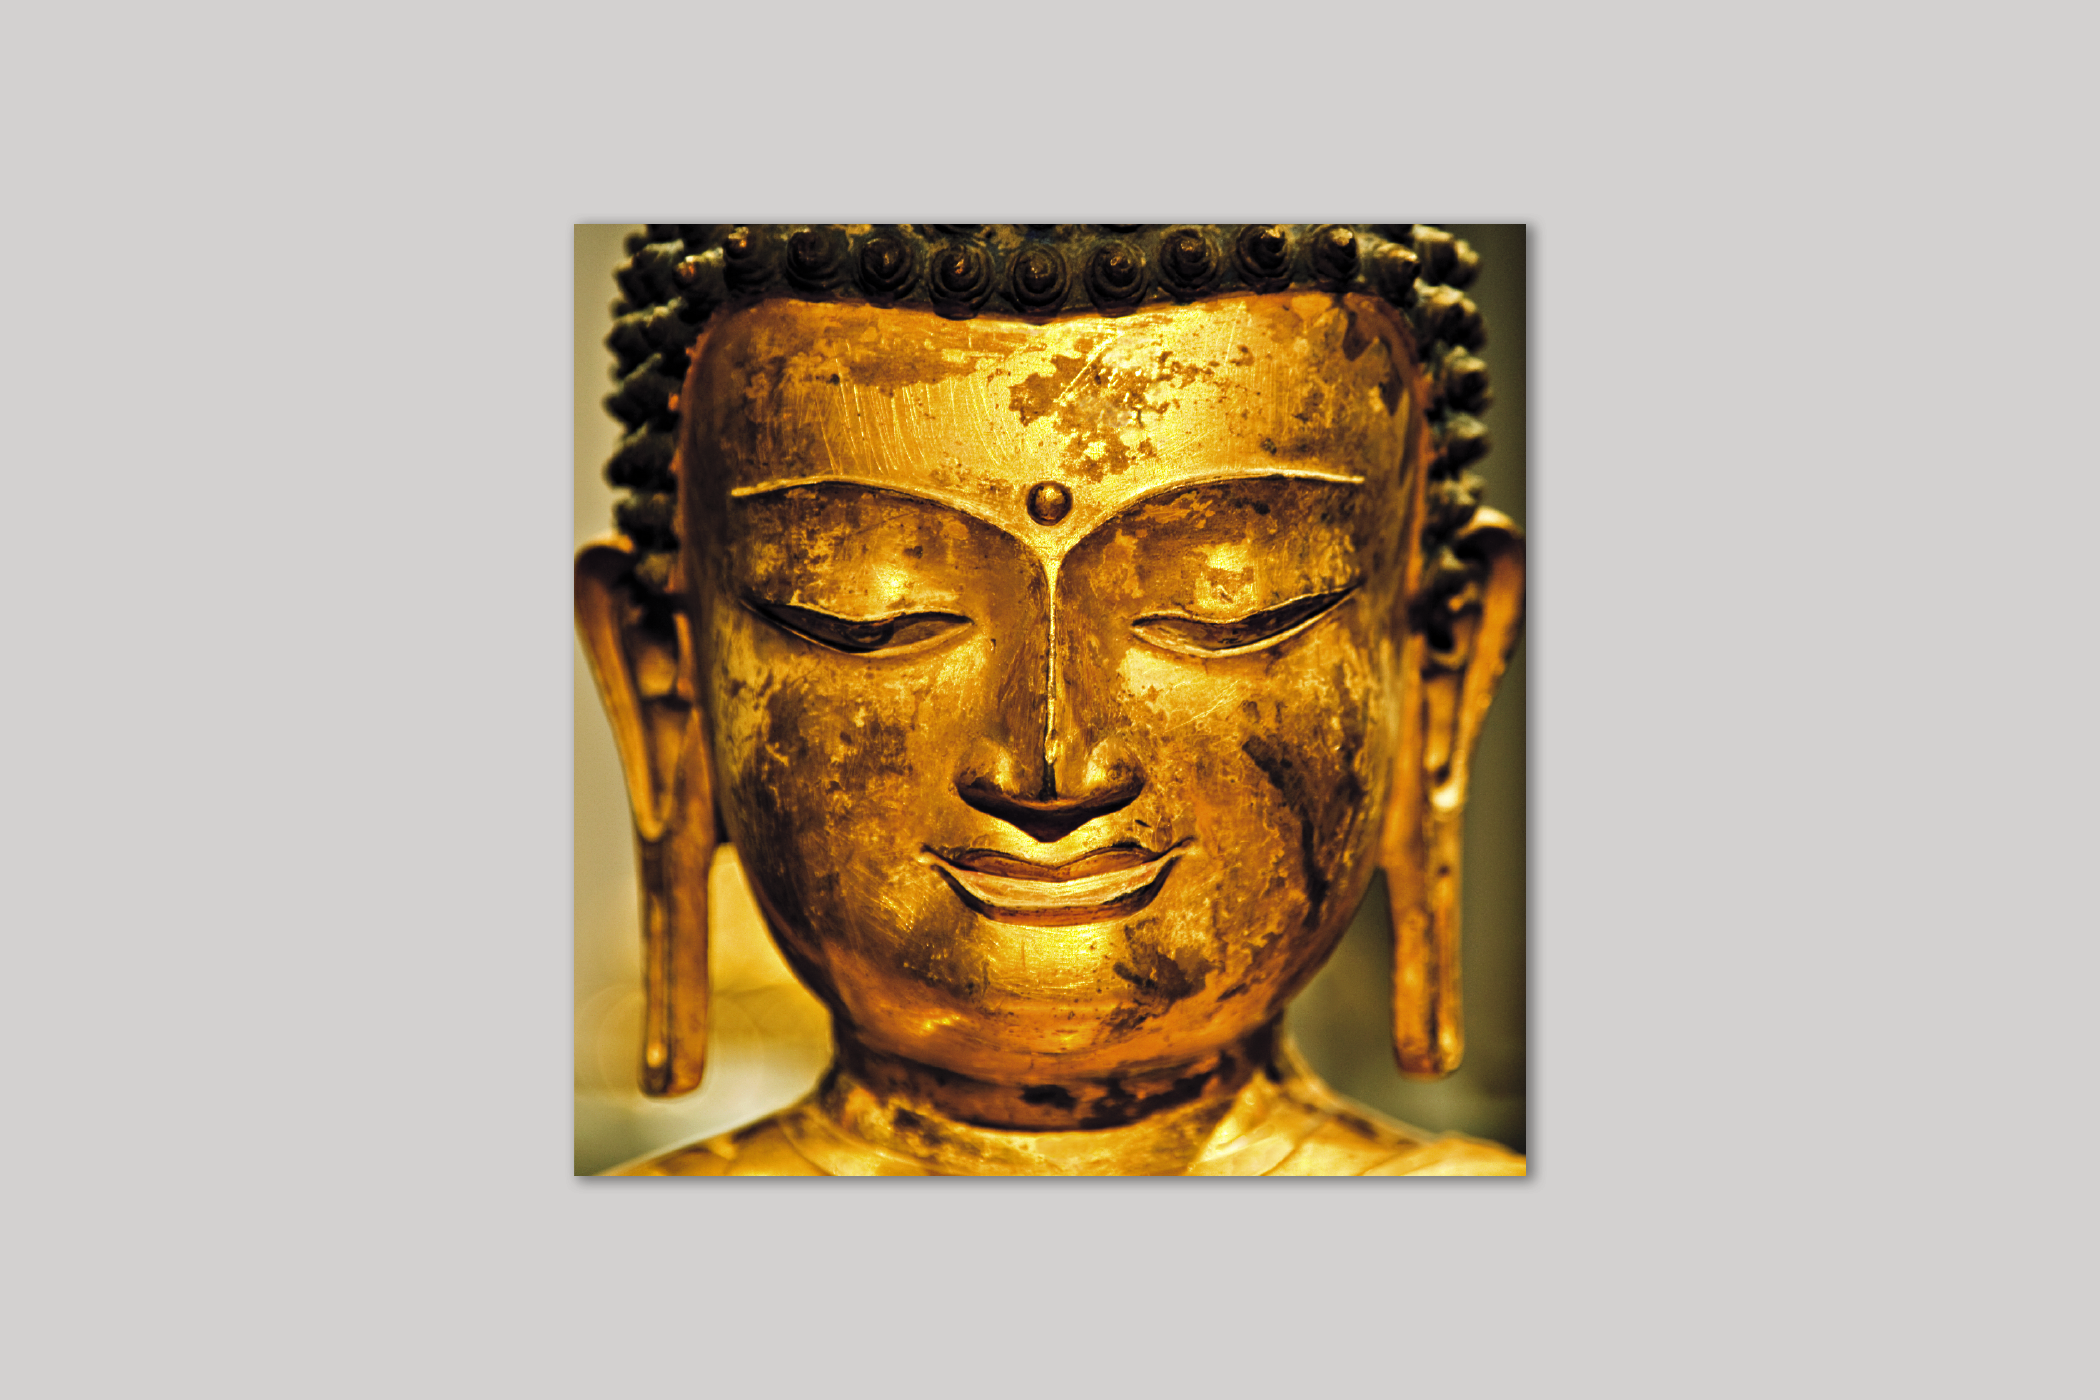 Golden Buddha from Exposure range of photographic cards by Icon.